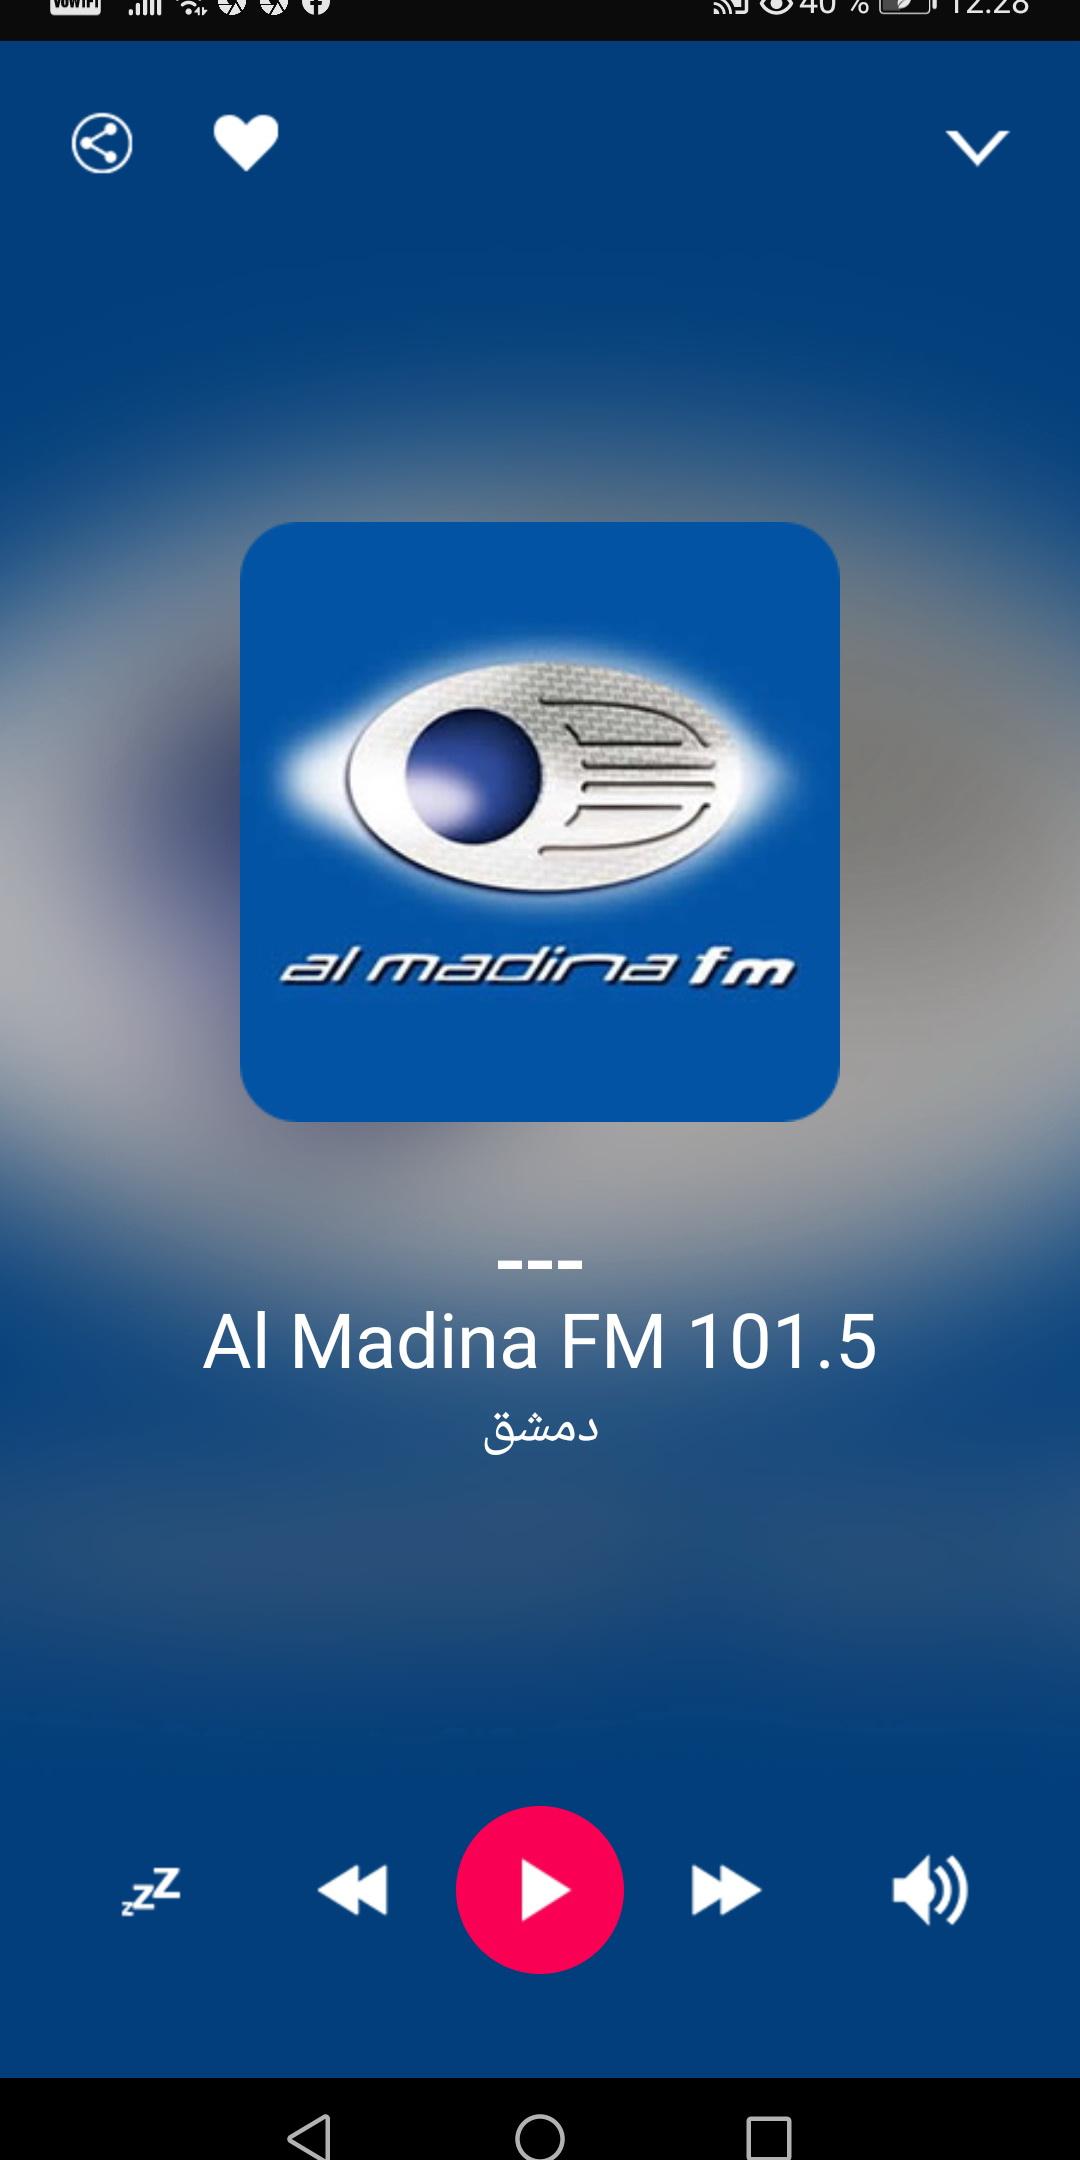 Syrian Radio Stations for Android - APK Download